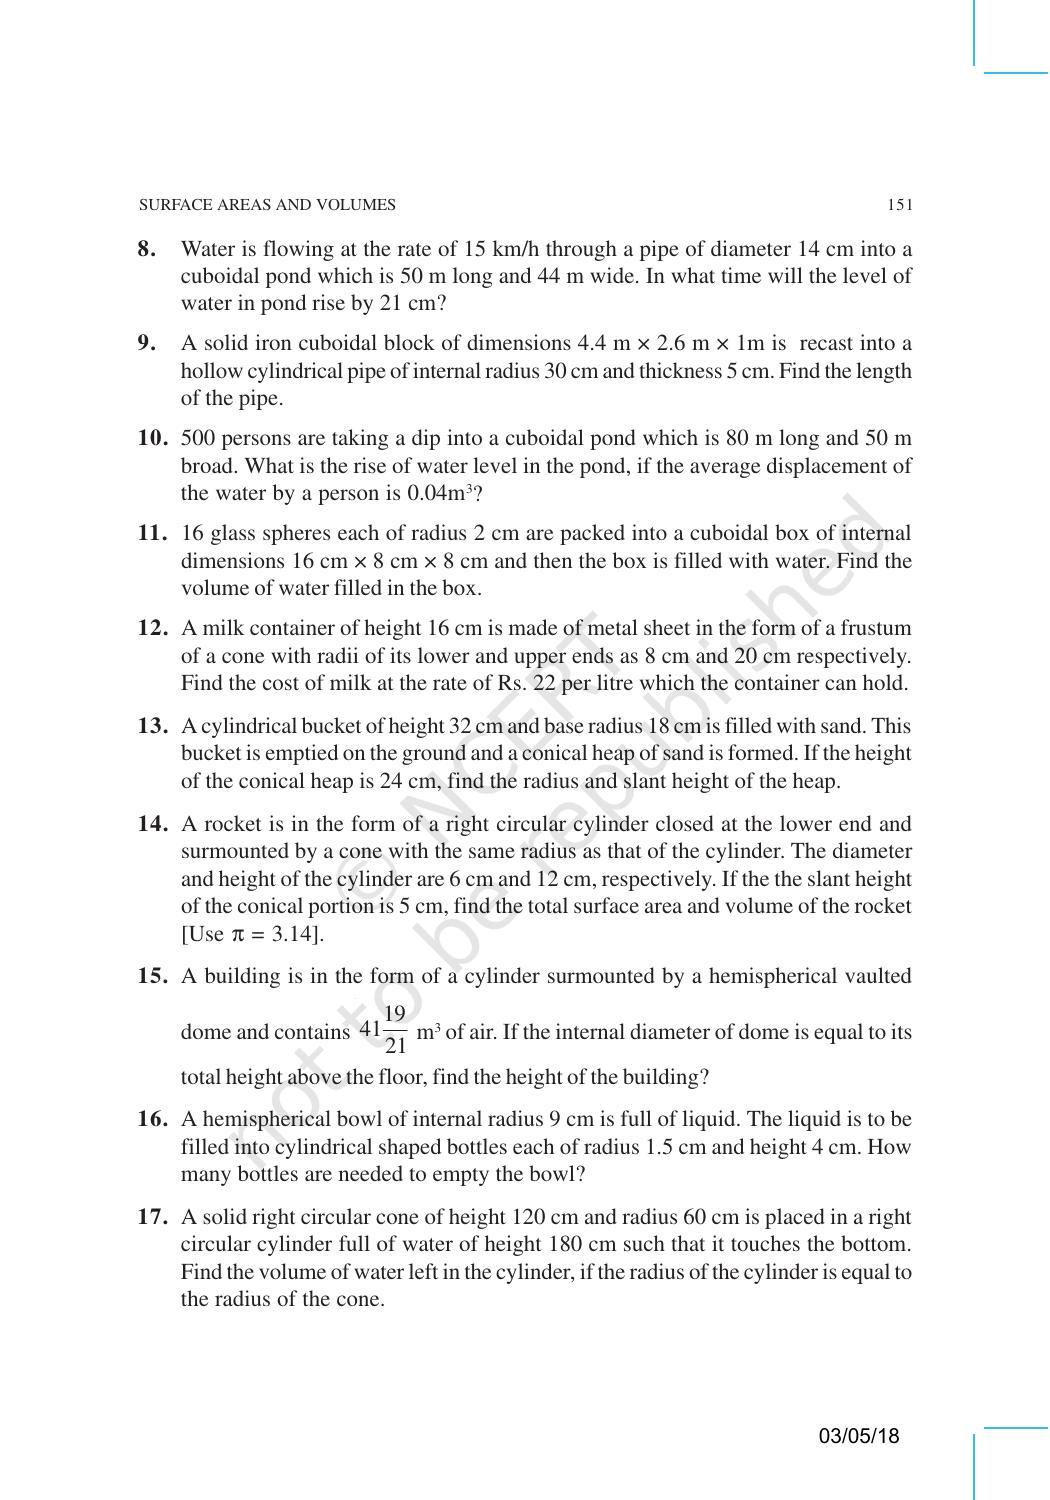 NCERT Exemplar Book for Class 10 Maths: Chapter 12 Surface areas and Volumes - Page 16